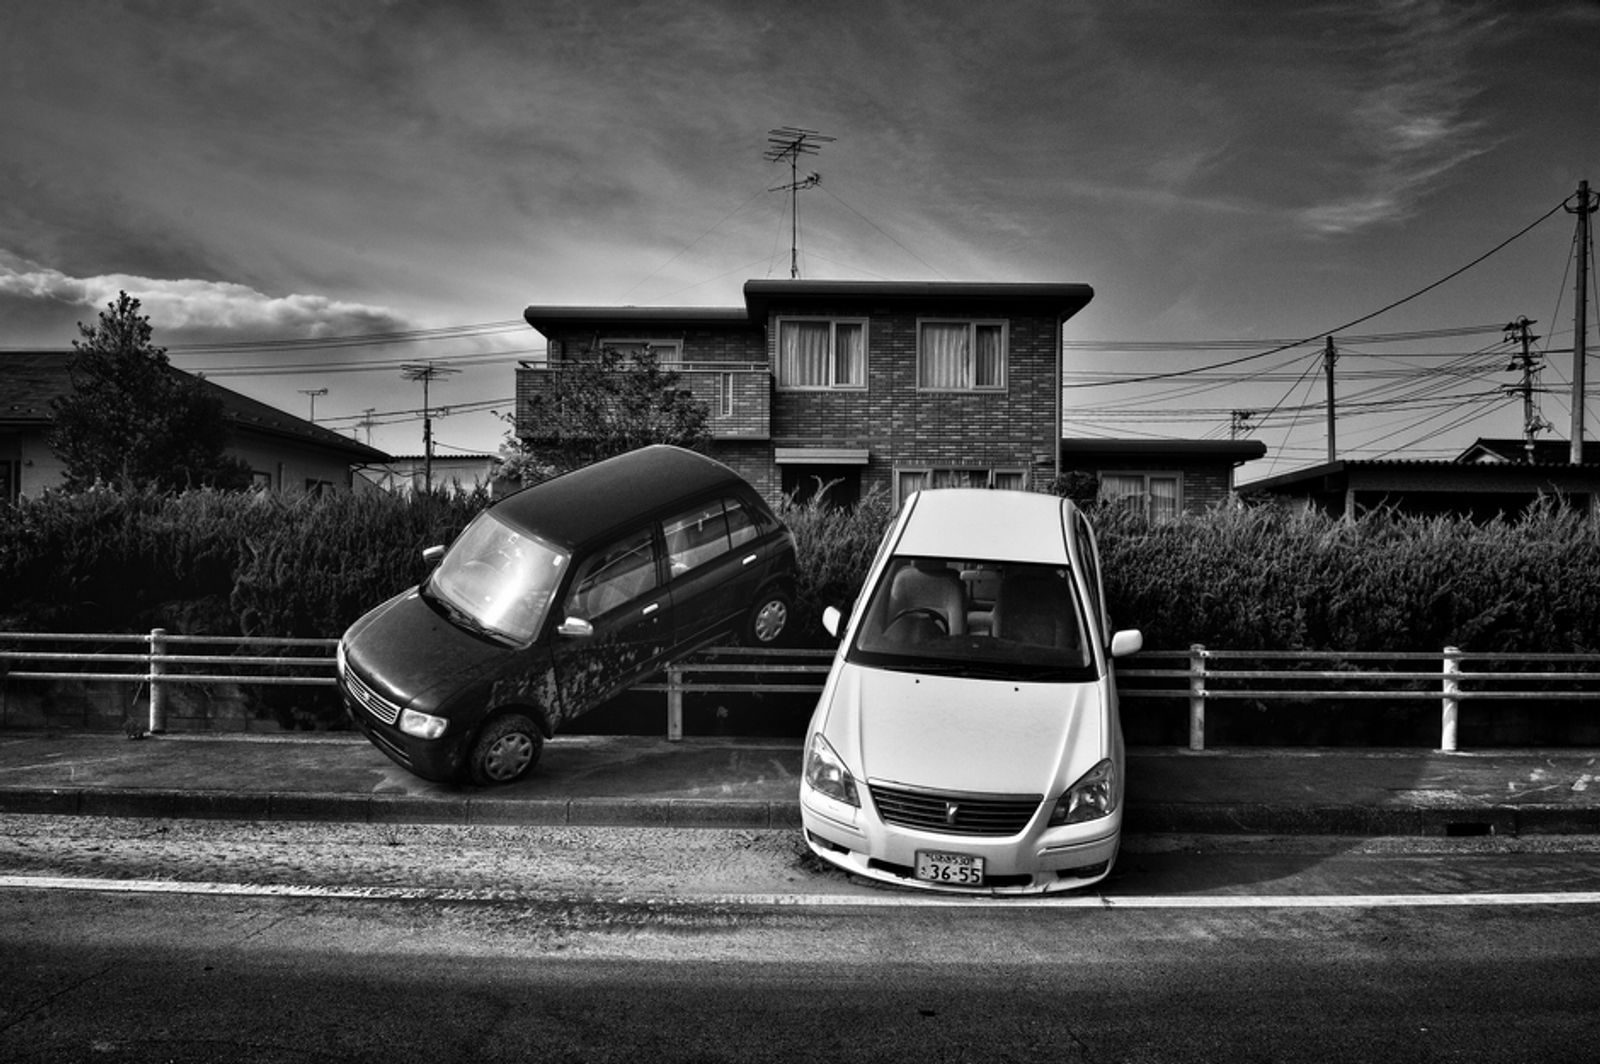 © Pierpaolo Mittica - Image from the Fukushima No-Go Zone photography project